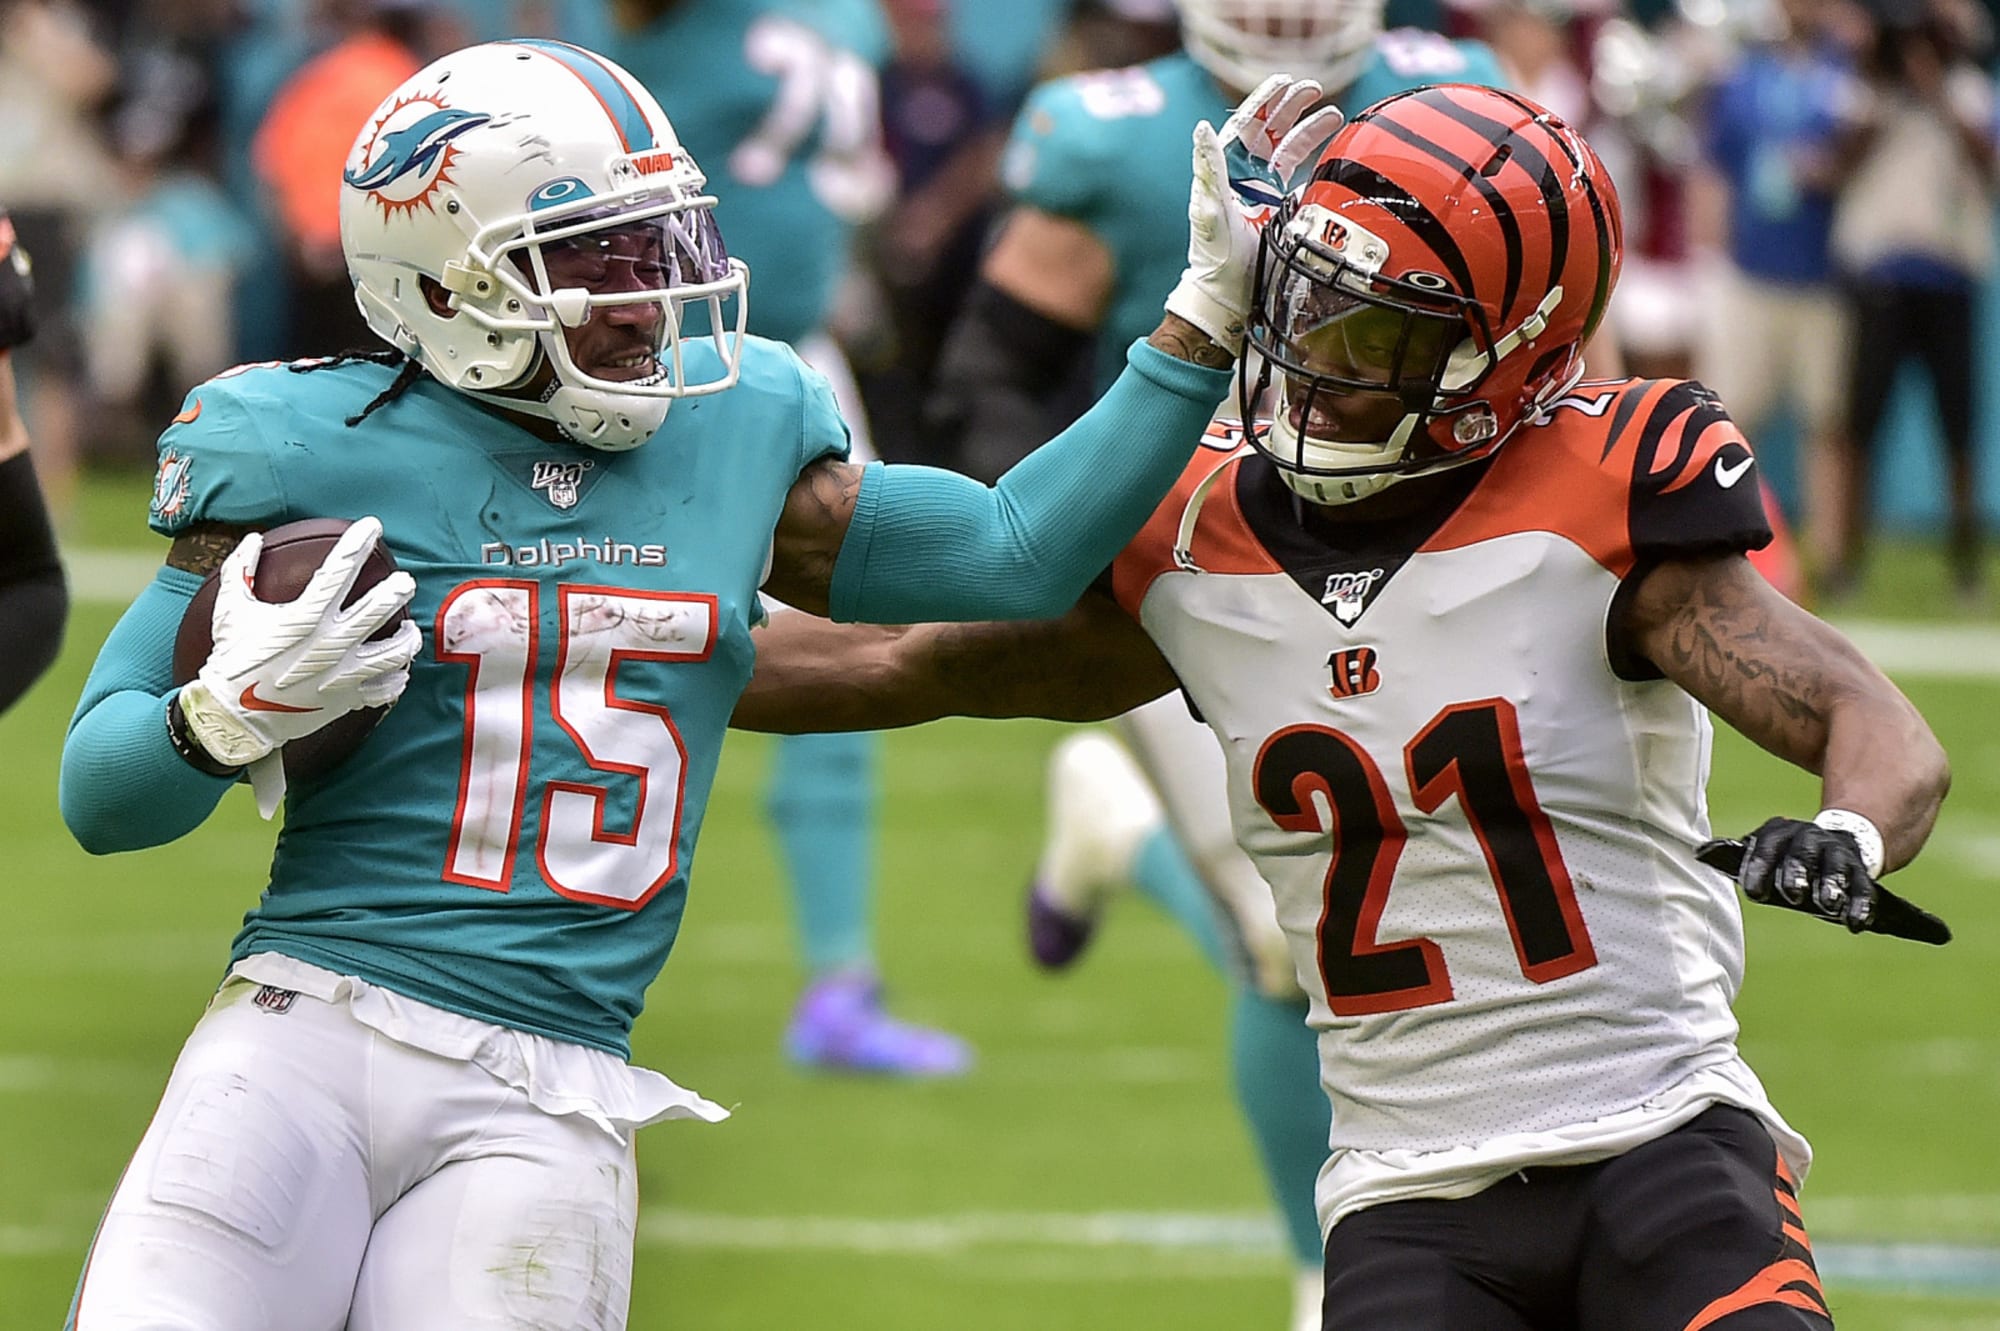 Bengals lock up No. 1 pick in 2020 NFL Draft with loss to Dolphins